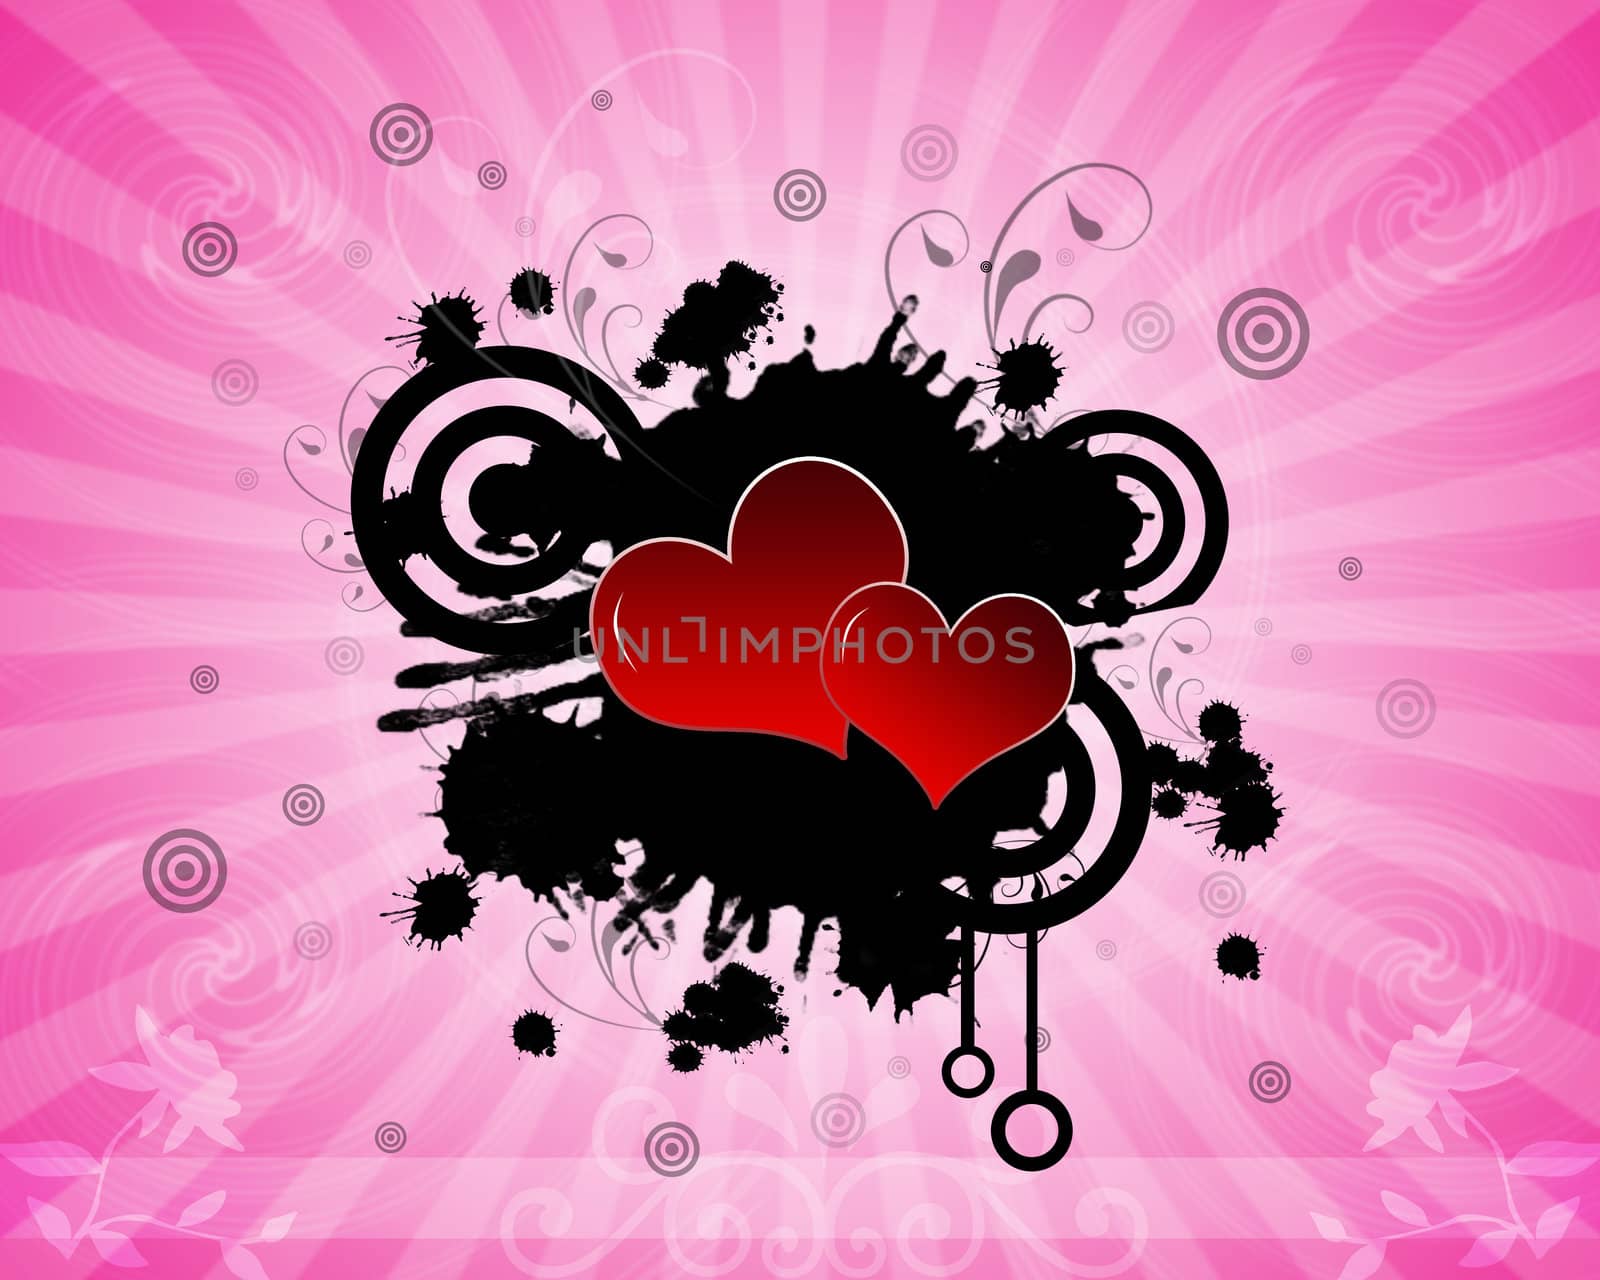 Heart on a Sunrays illustration high resolution with splatter and swirls brushes